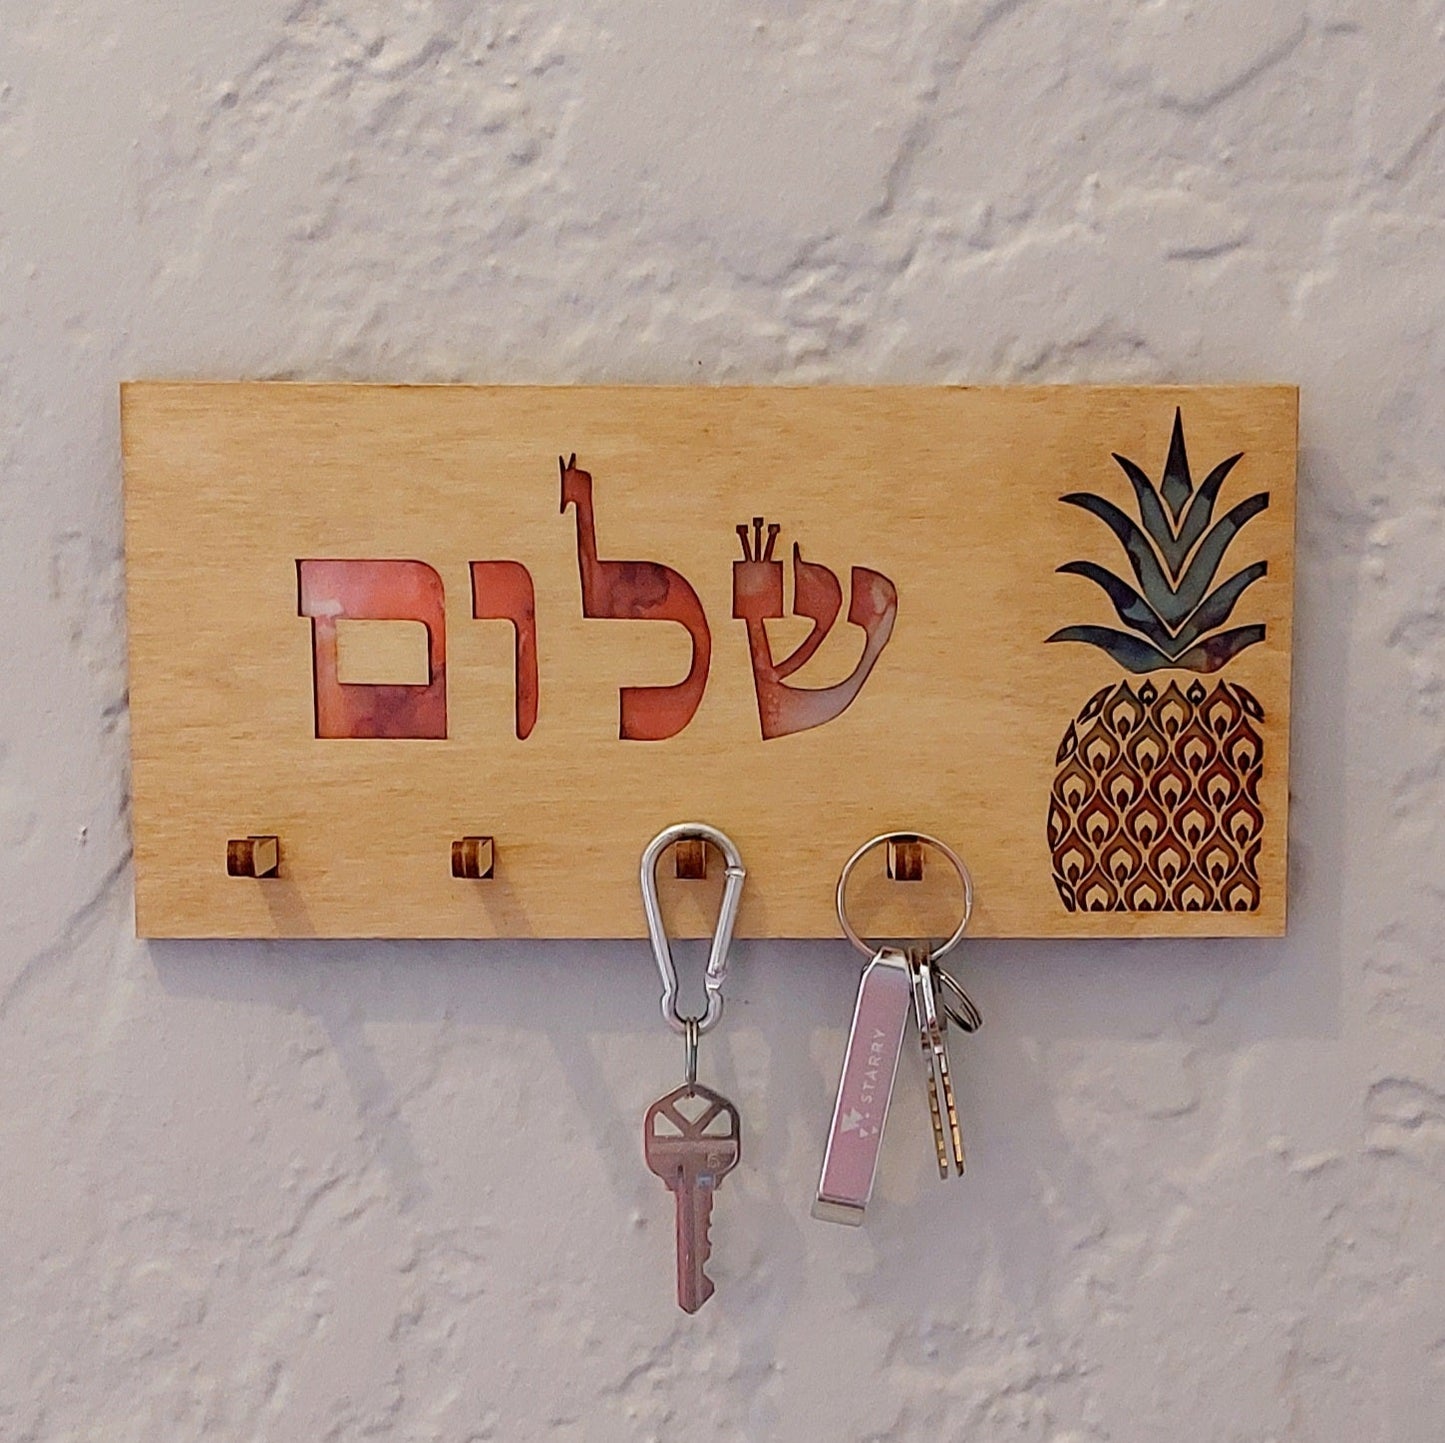 Lightly stained wood rectangular key holder. Cutout "שלום" with red background, pineapple with green, yellow, and orange, and 4 pegs for keys with keys hanging on them.